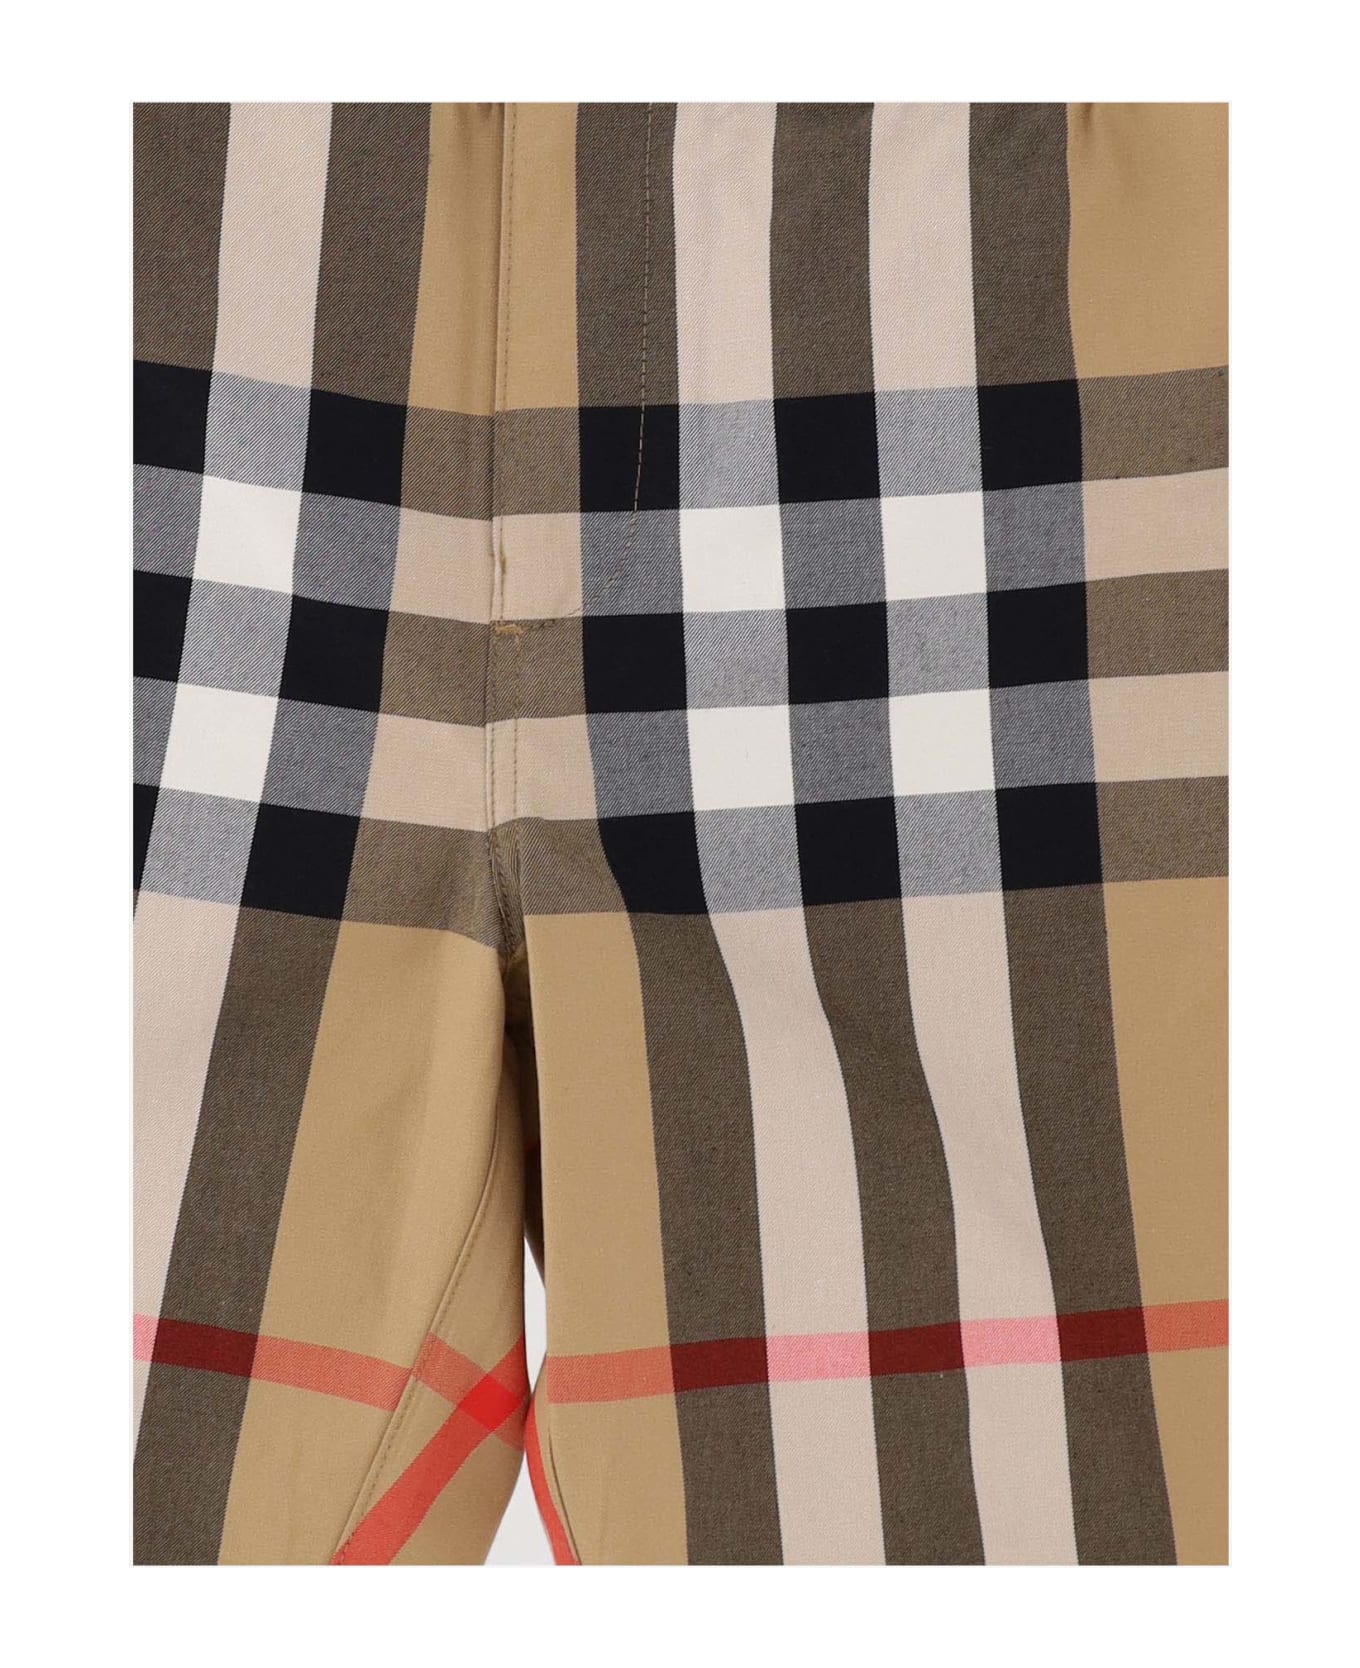 Burberry Cotton Short Pants With Check Pattern - Red